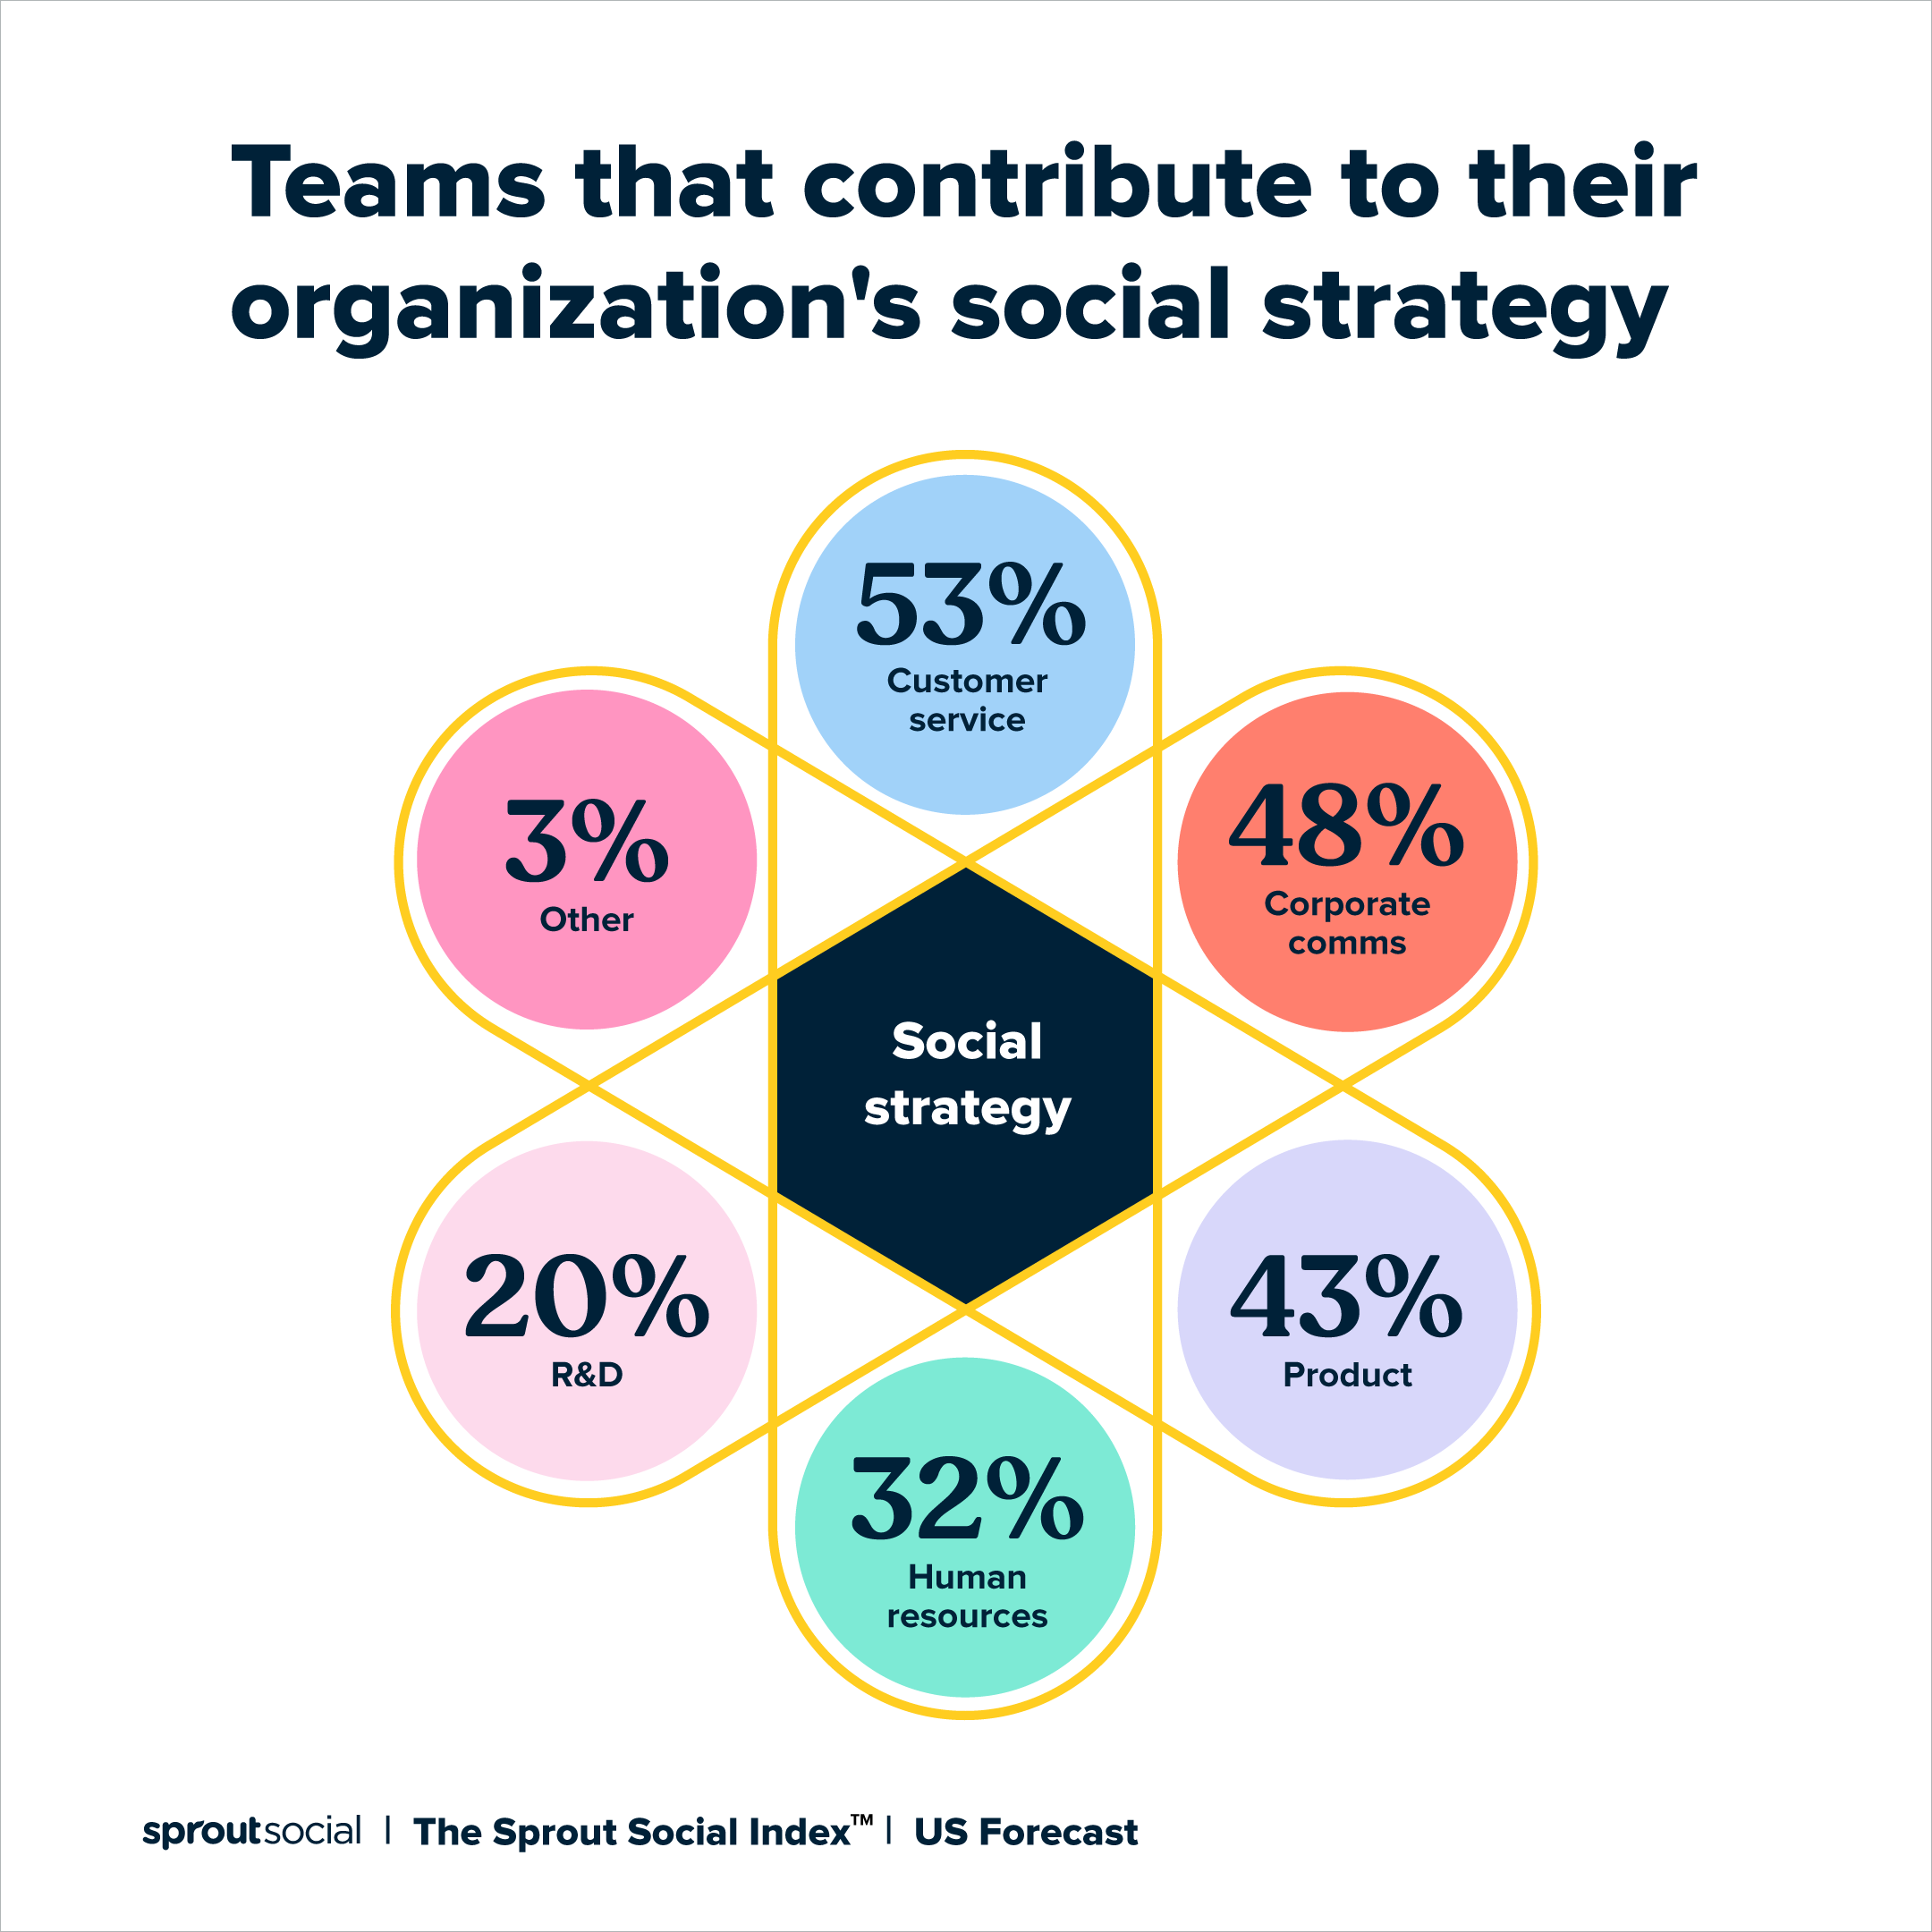 A data visualization that reads "Teams that contribute to their organization's social strategy." The chart demonstrates that customer service, corporate communications, product, HR and R&D teams contribute to their company's social strategy.